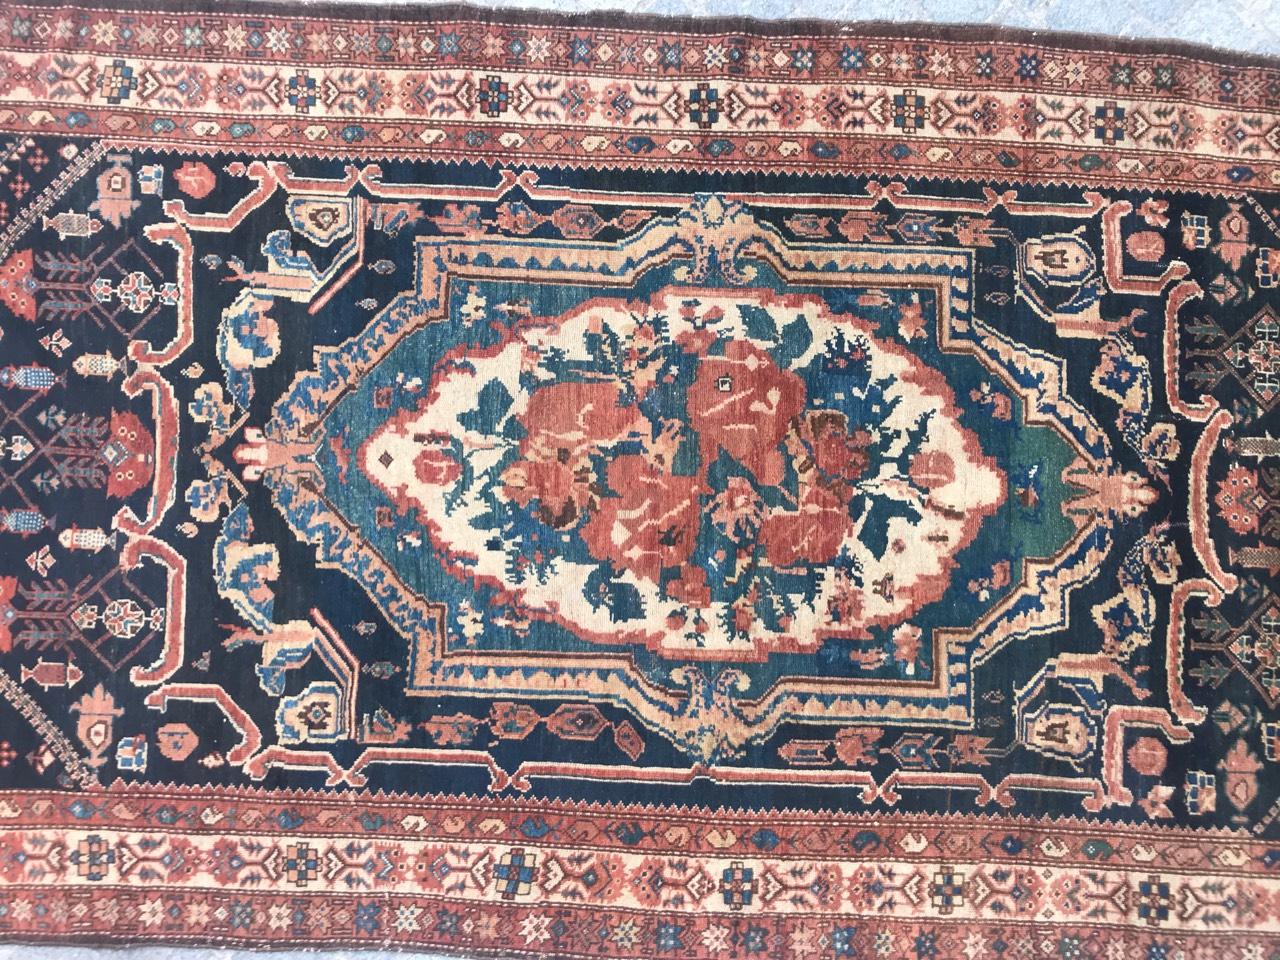 Discover the timeless elegance of our exquisite late 19th-century Bakhtiar rug. Adorned with a captivating central medallion floral Savonnerie design, tribal motifs, and a rich palette of orange, blue, green, pink, and dark blue, this masterpiece is